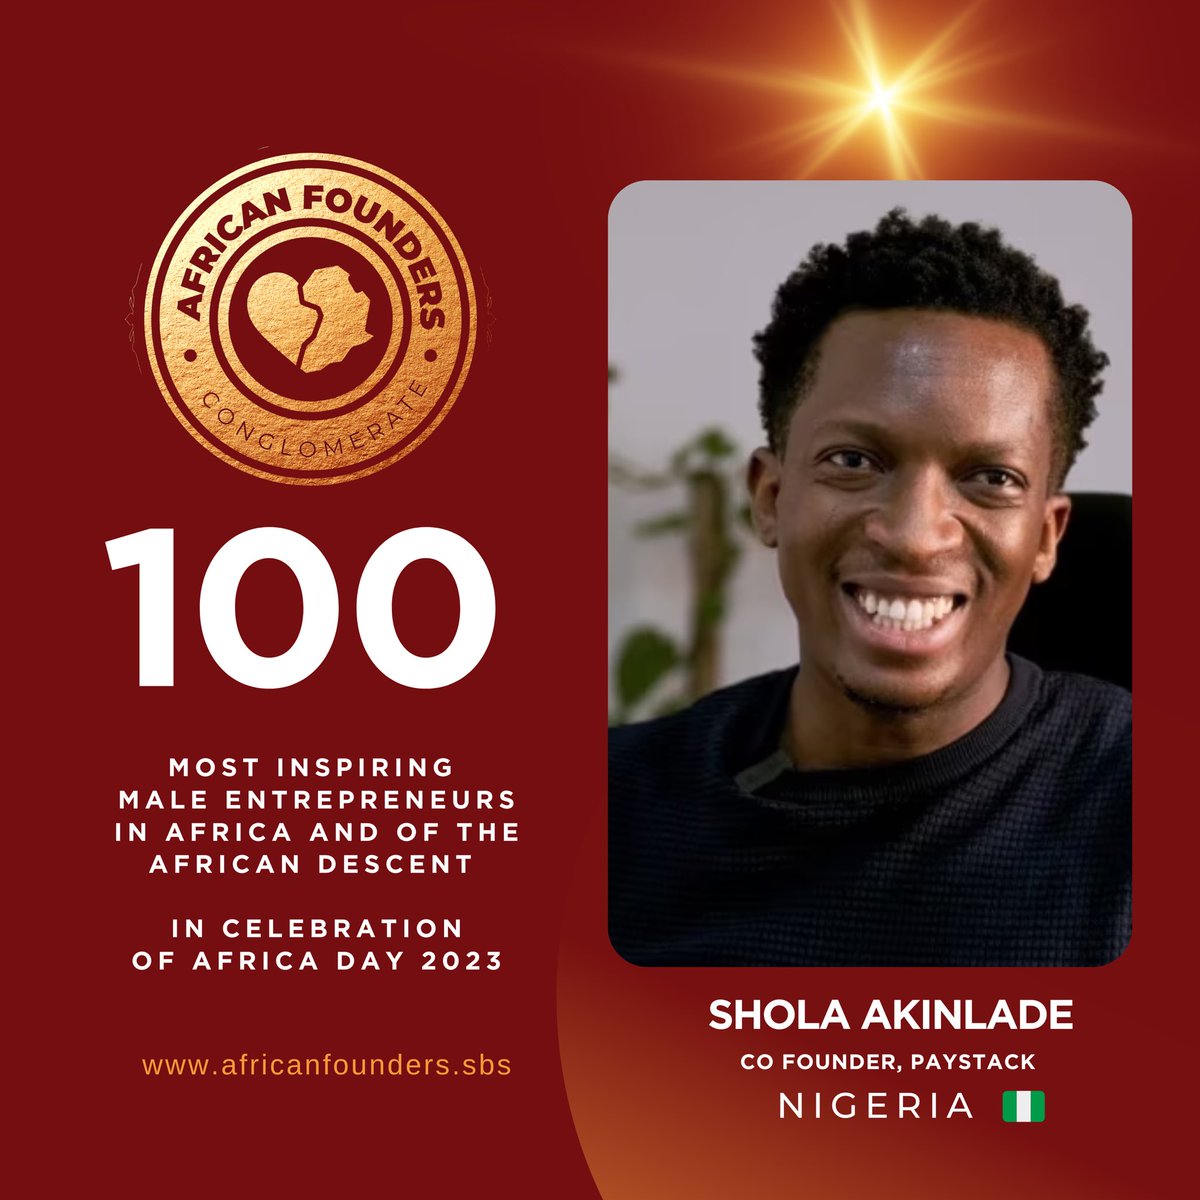 #AFCFeatures | In celebration of AFRICA DAY ,we honor #Sholaakinlade @paystack for his resilience, achievements and great entrepreneurial spirit.

African Founders Feature.
#100mostinspiringmaleentrepreneurs
.
AFRICAN FOUNDERS CONGLOMERATE | Promoting Entrepreneurship & Lifestyle